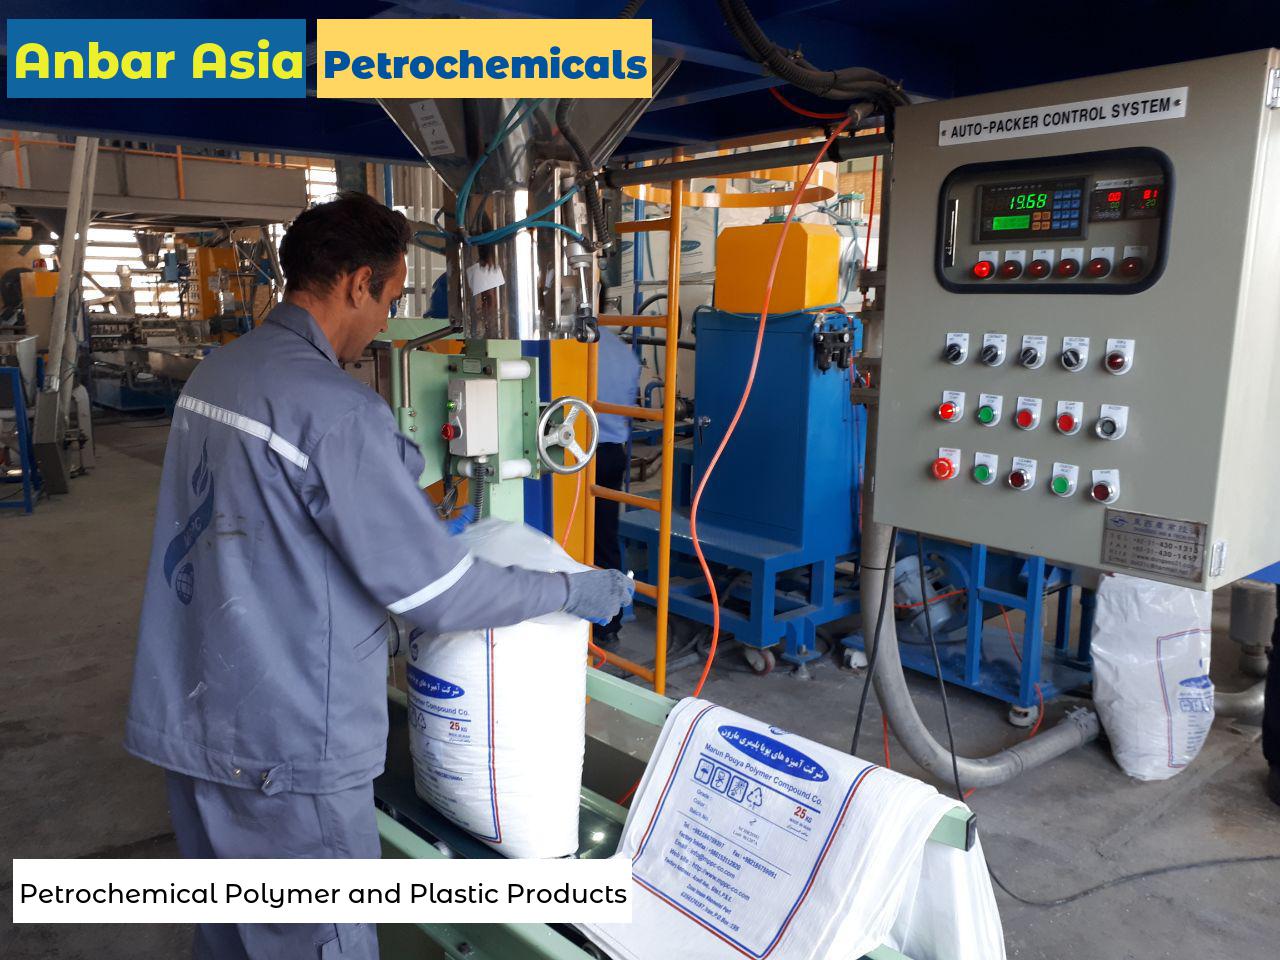 Petrochemical Polymer and Plastic Products